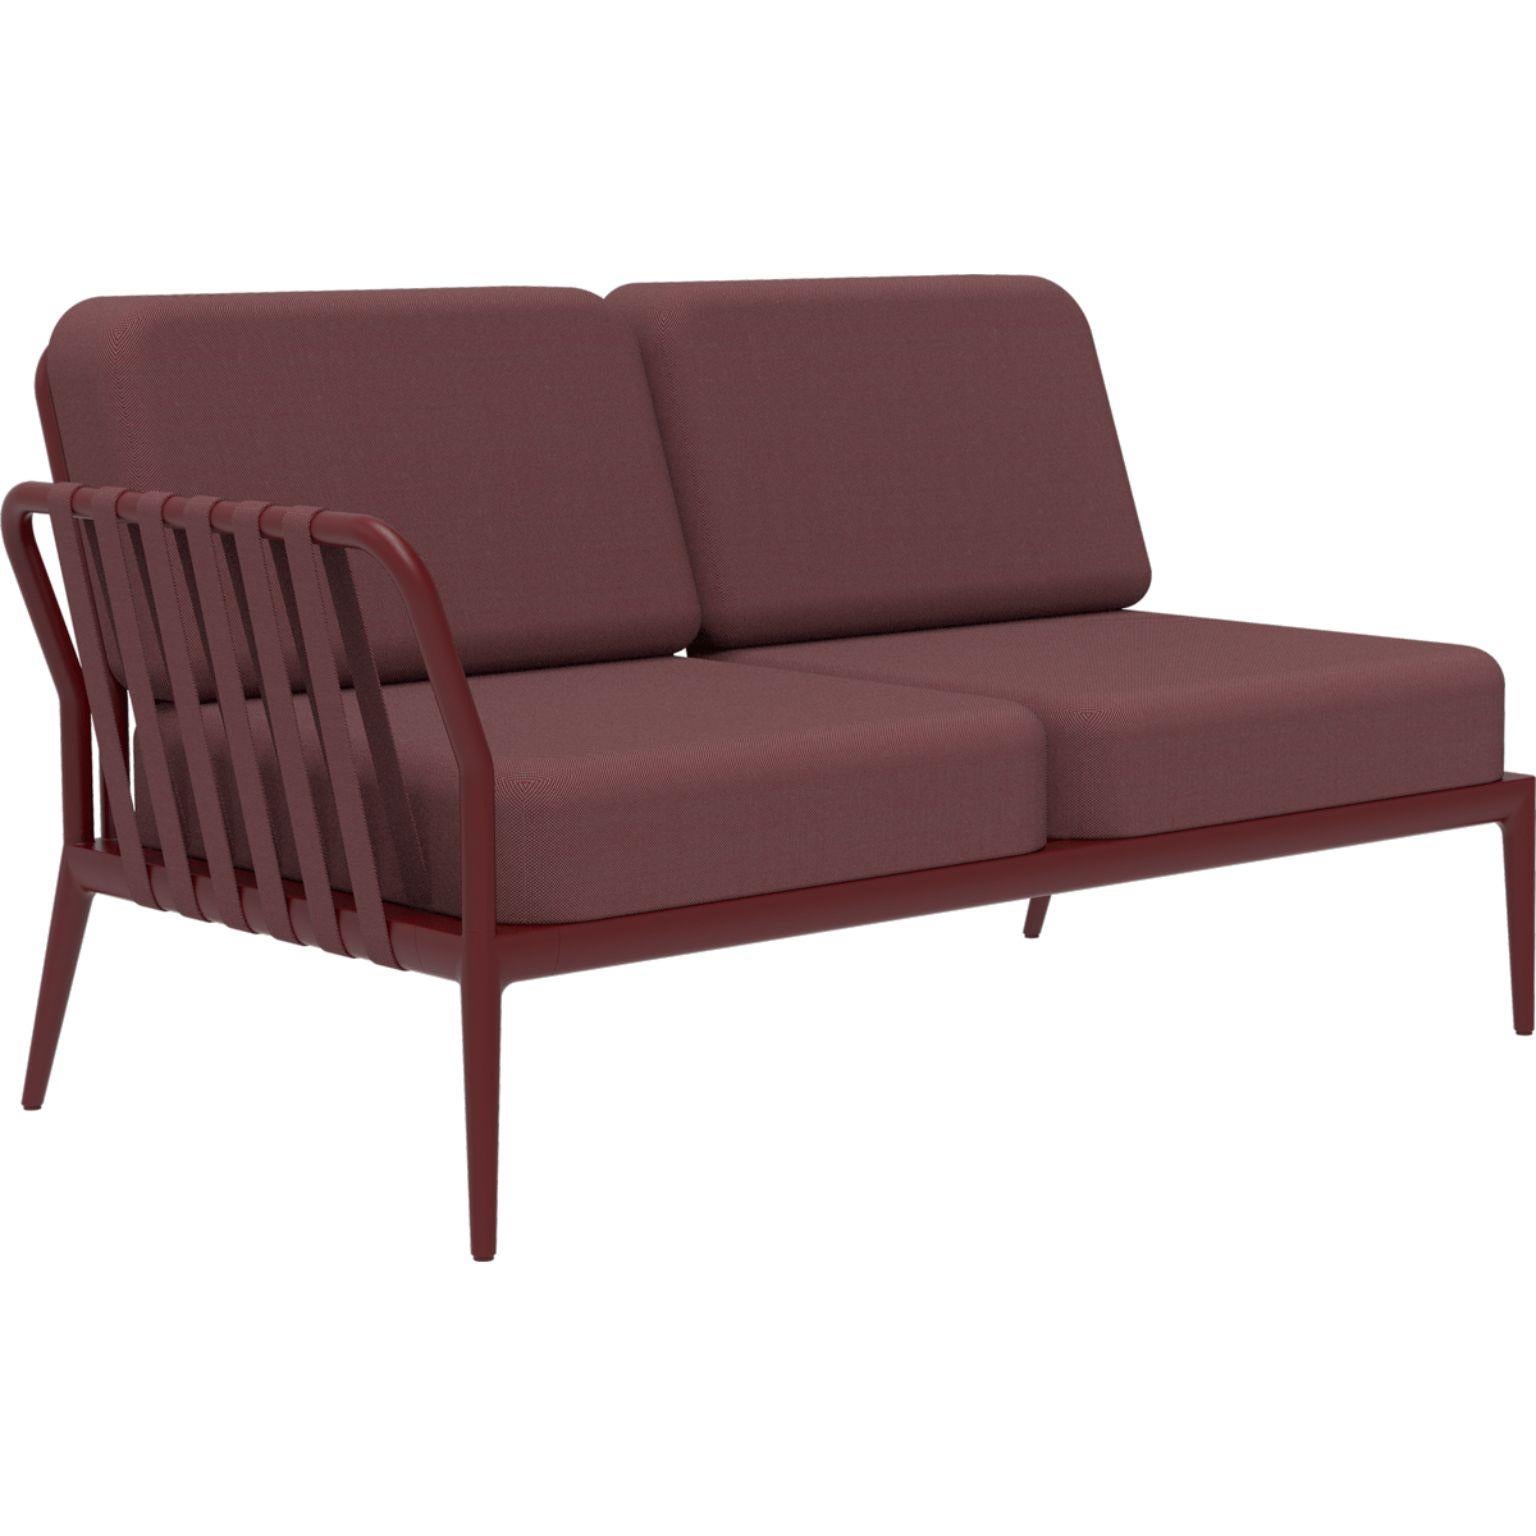 Ribbons burgundy double right modular sofa by MOWEE.
Dimensions: D83 x W148 x H81 cm (seat height 42 cm).
Material: Aluminium and upholstery.
Weight: 29 kg
Also available in different colors and finishes. 

An unmistakable collection for its